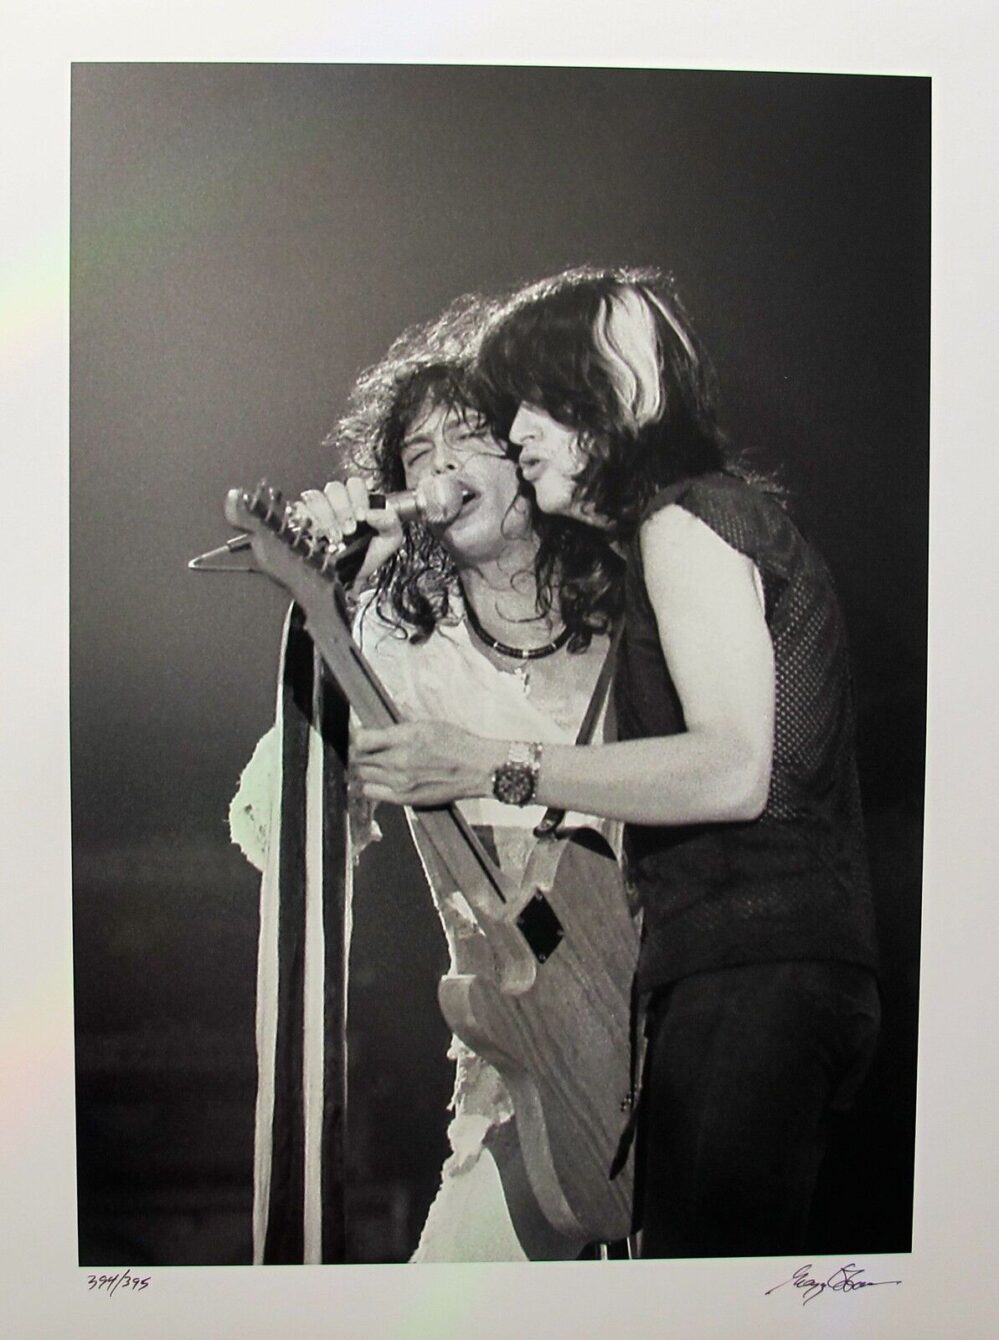 AEROSMITH Hand Signed Limited Edition Photograph by GREGG COBARR